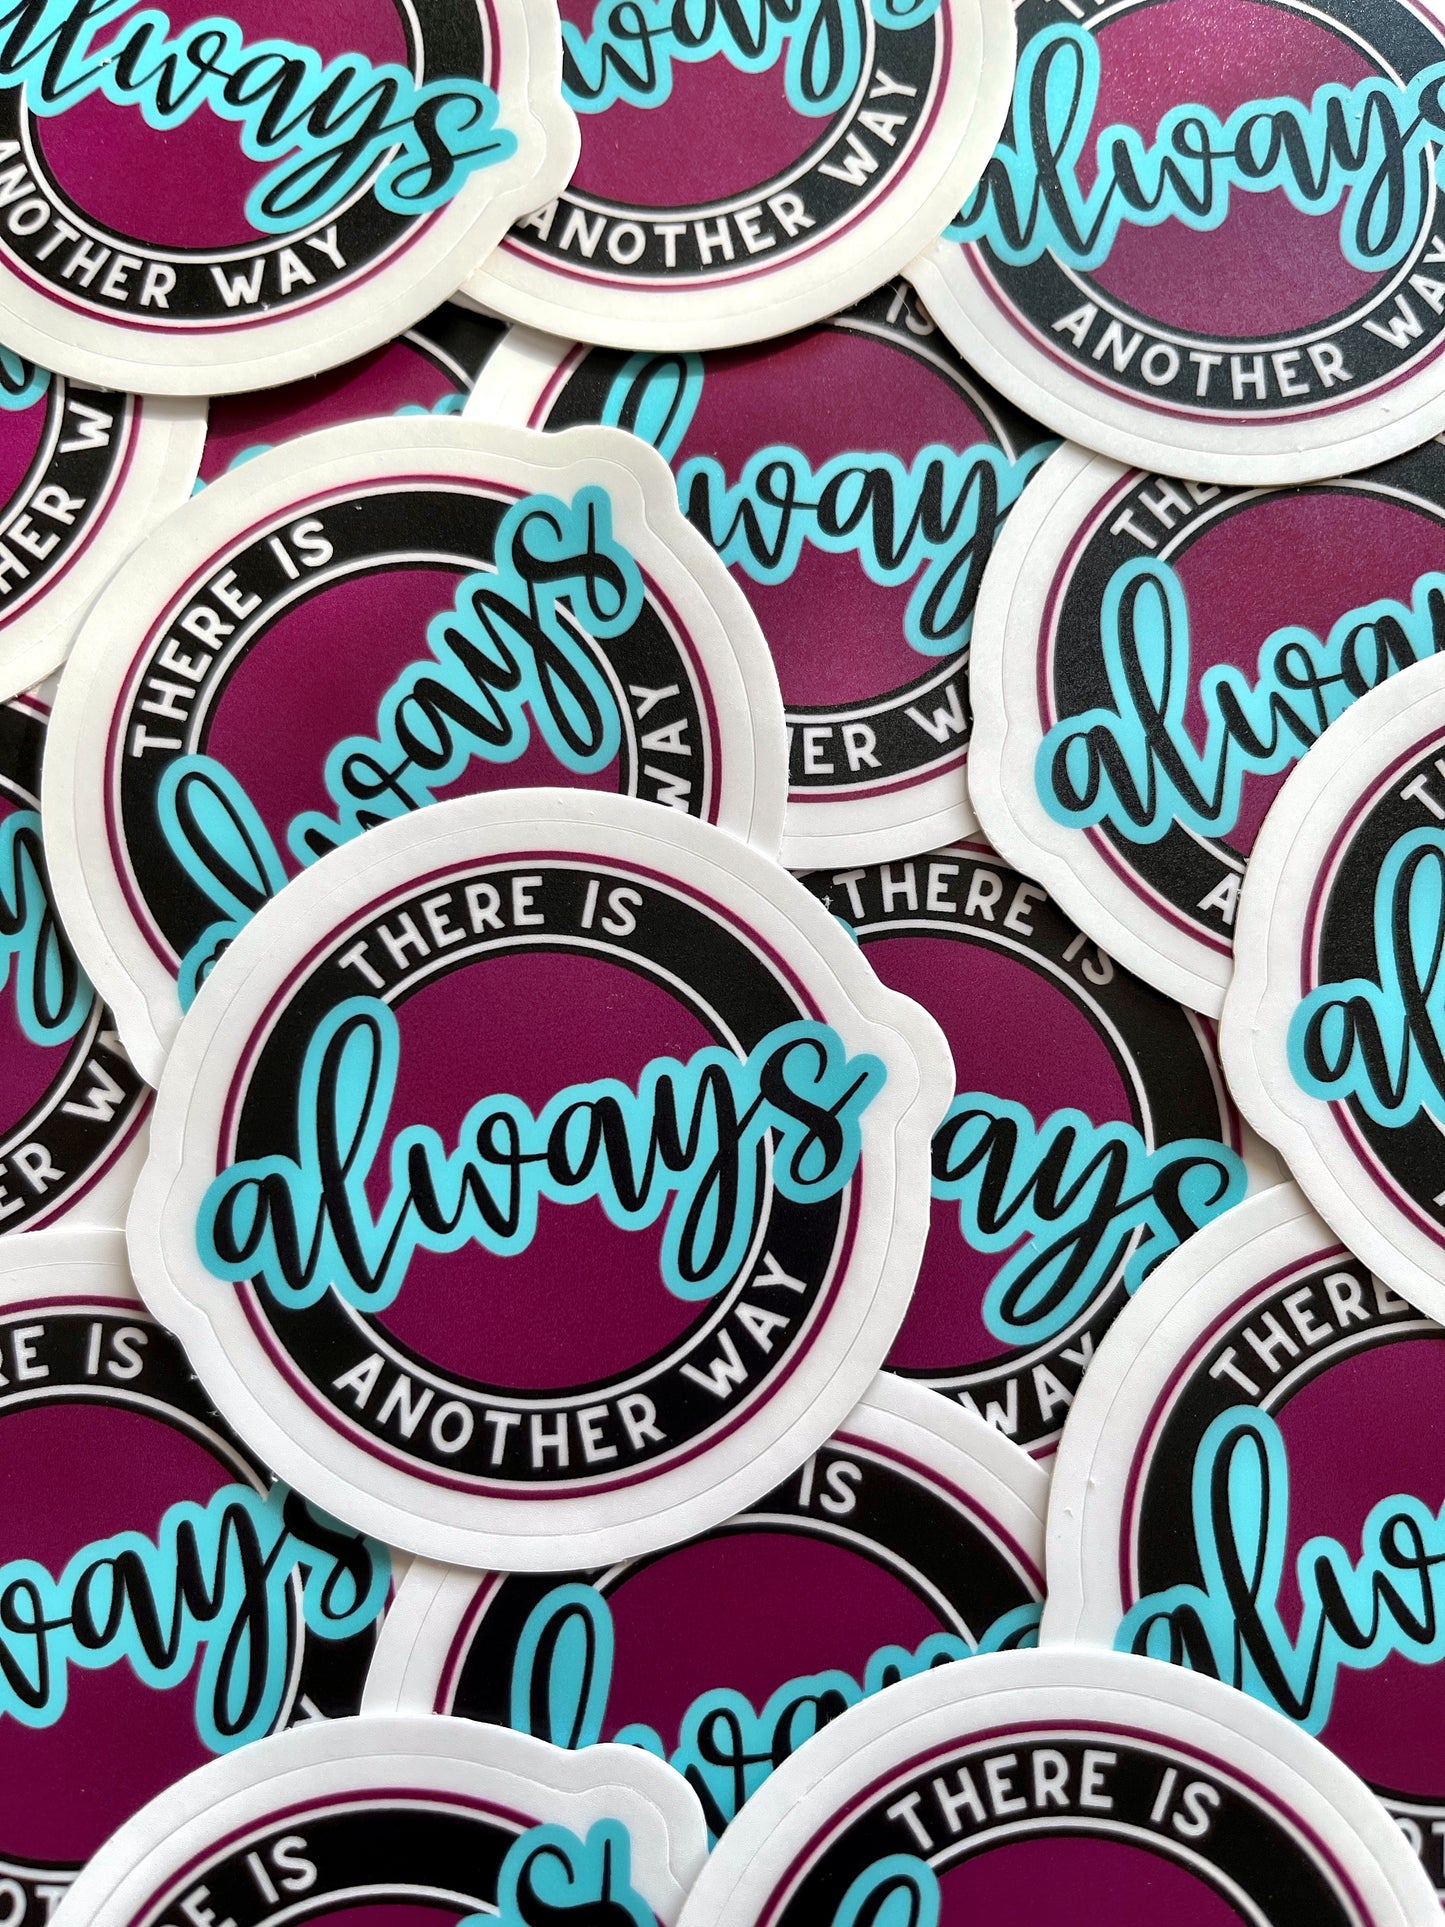 Always another way Affirmation Sticker-Affirmations That Stick CA